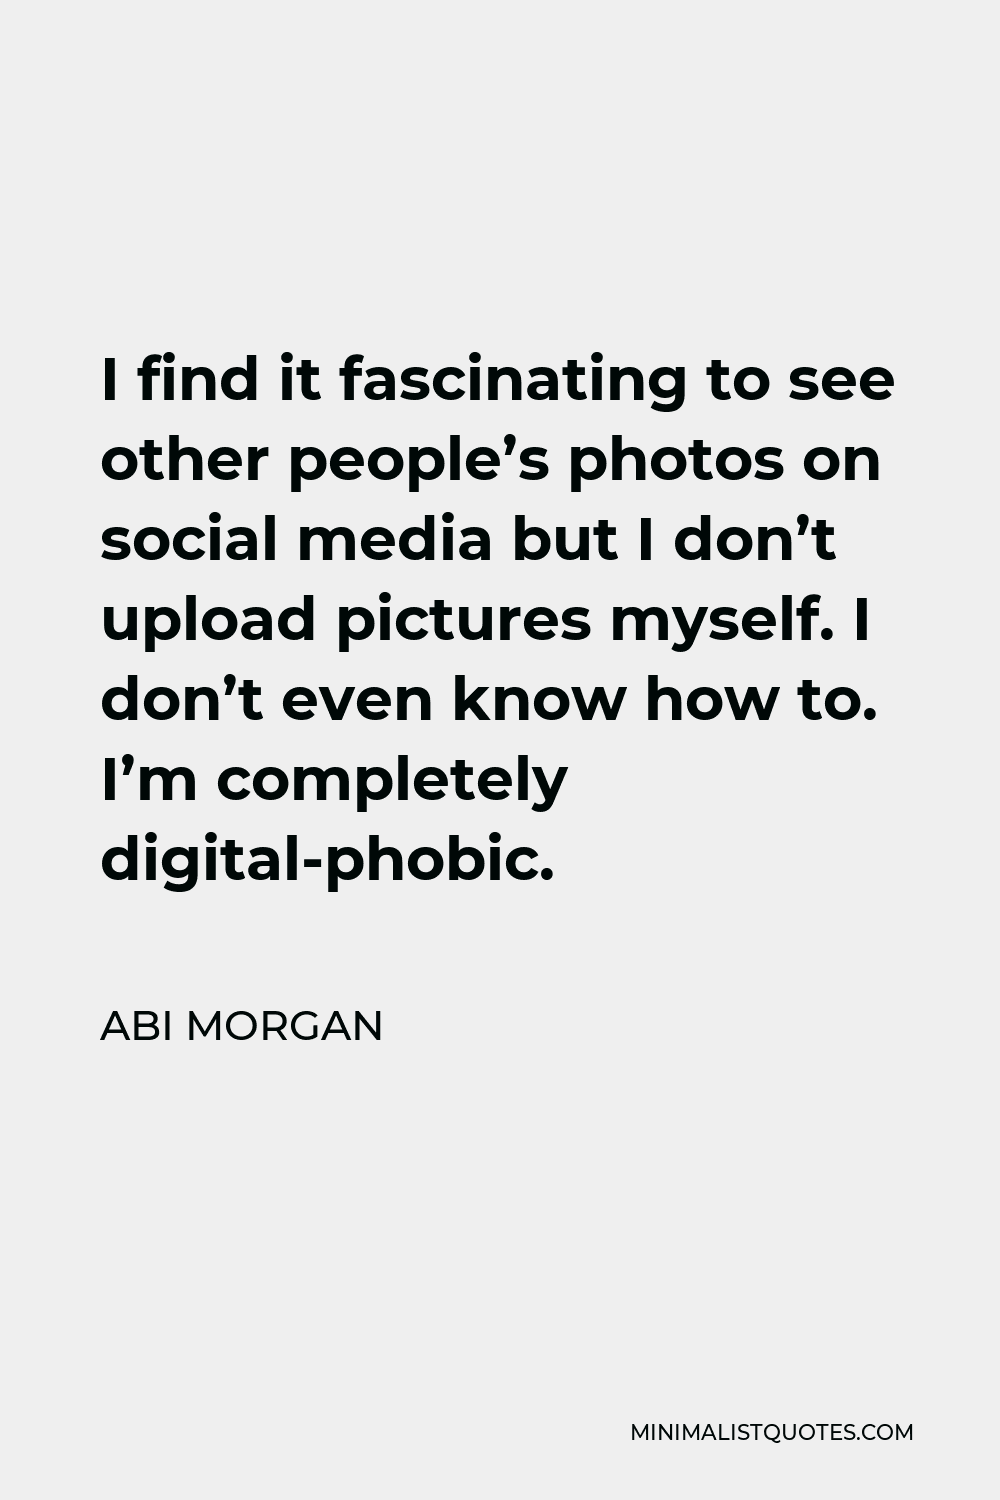 Abi Morgan Quote - I find it fascinating to see other people’s photos on social media but I don’t upload pictures myself. I don’t even know how to. I’m completely digital-phobic.